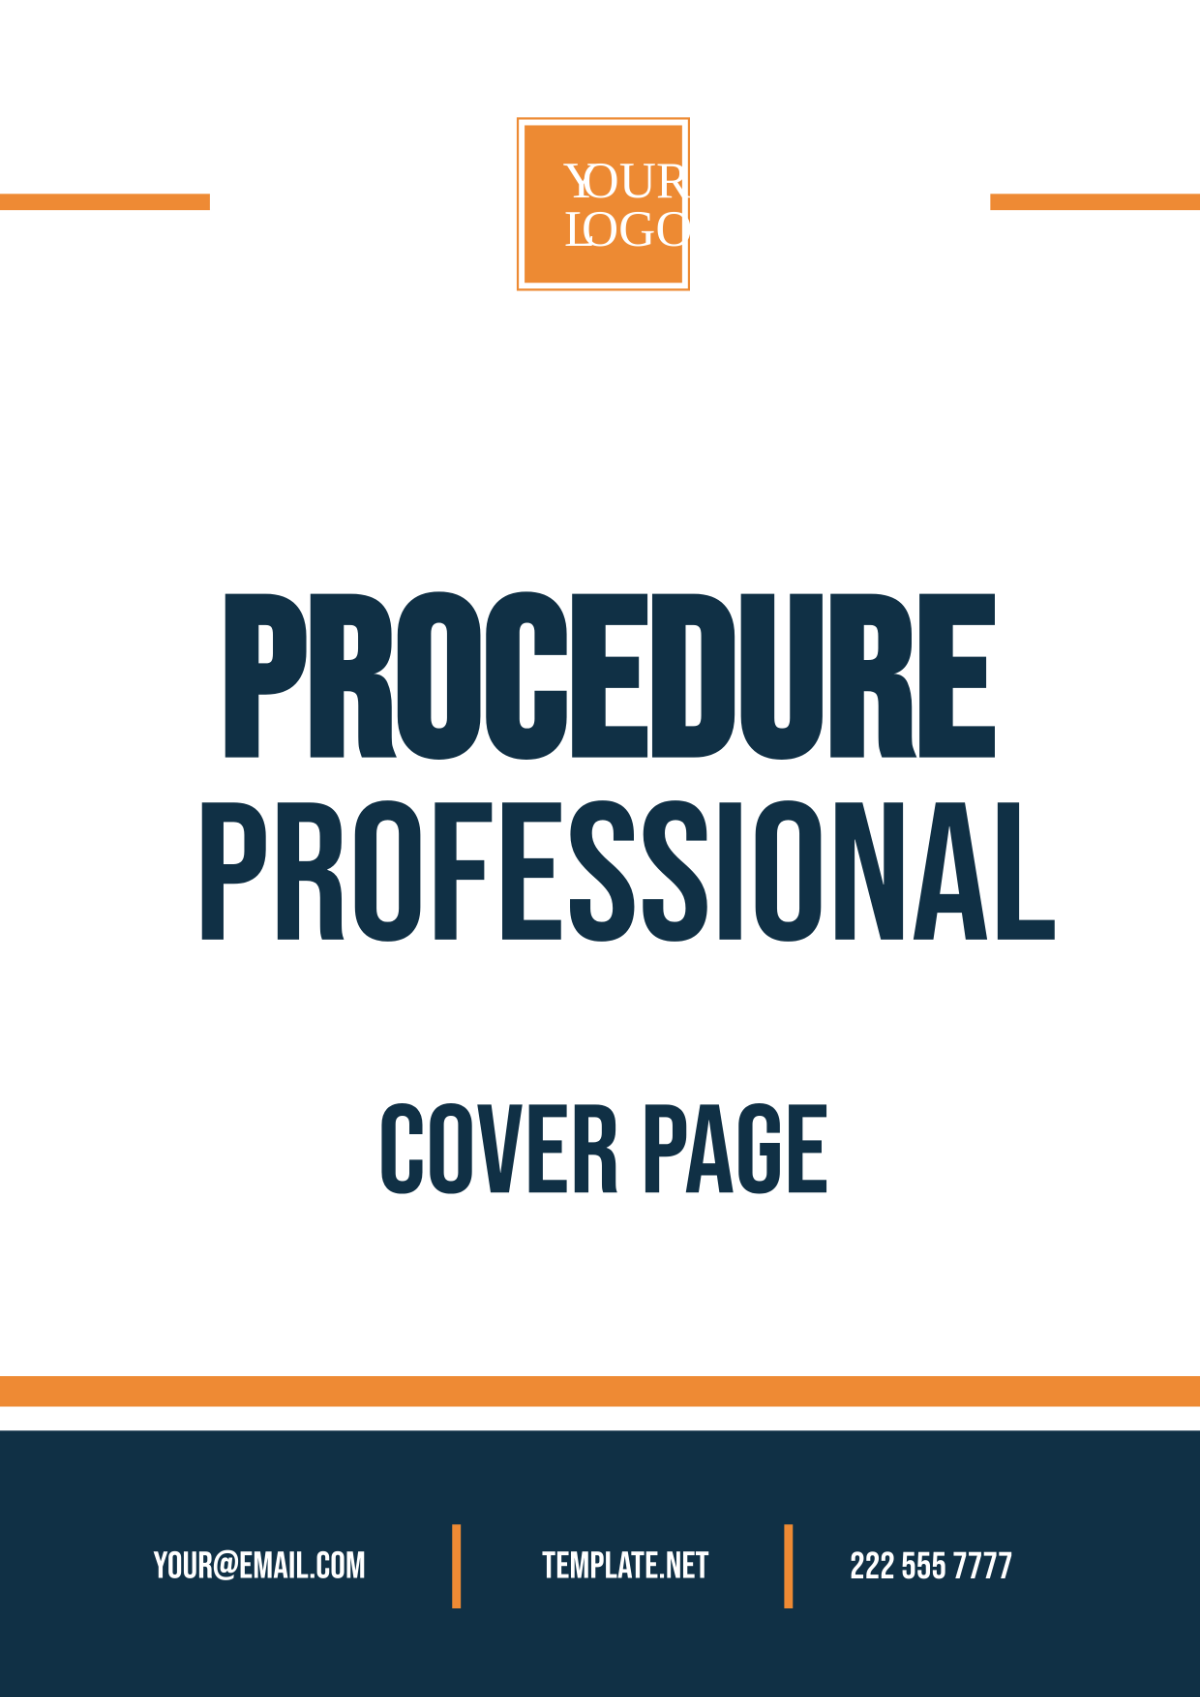 Procedure Professional Cover Page